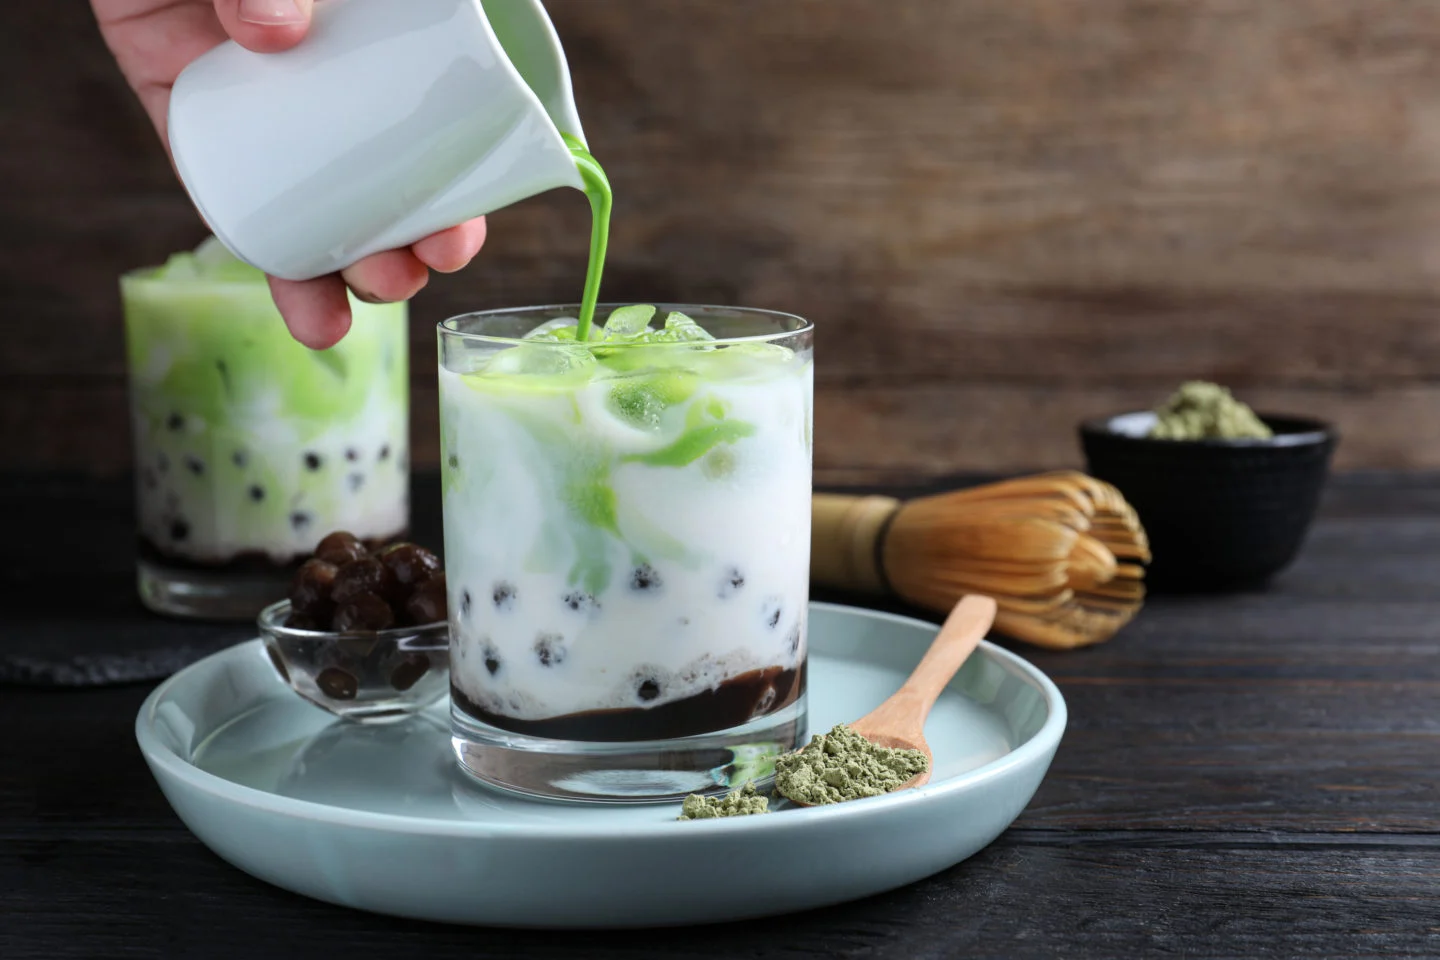 What are the pros and cons of buying a Boba Tea Kit online?